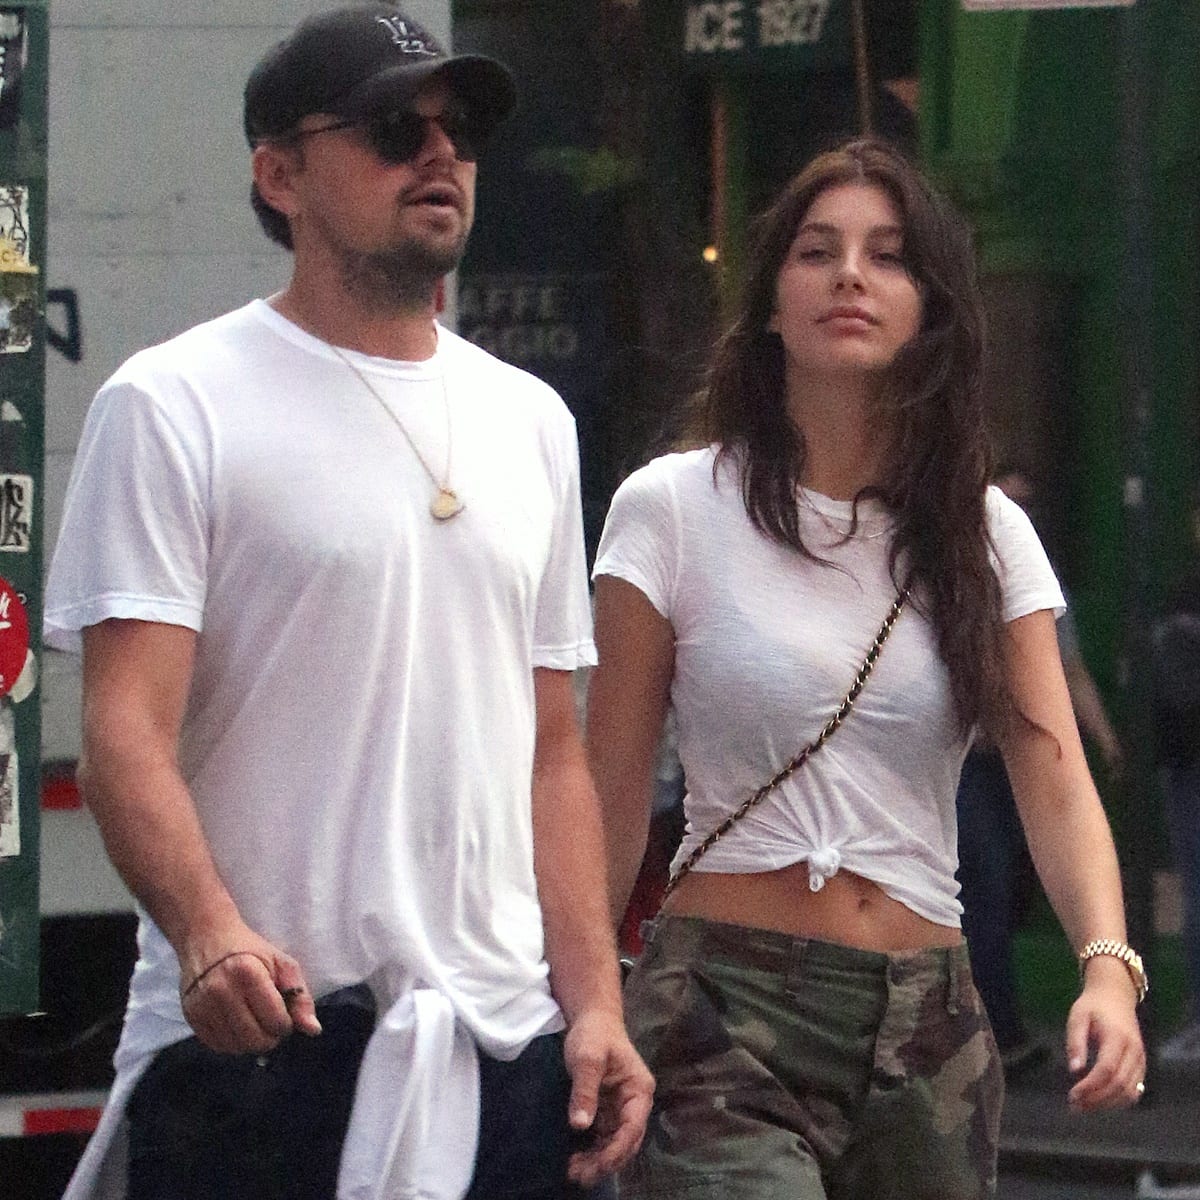 Leonardo DiCaprio split from his 23 years younger girlfriend Camila Morrone in August 2022 after dating for four years